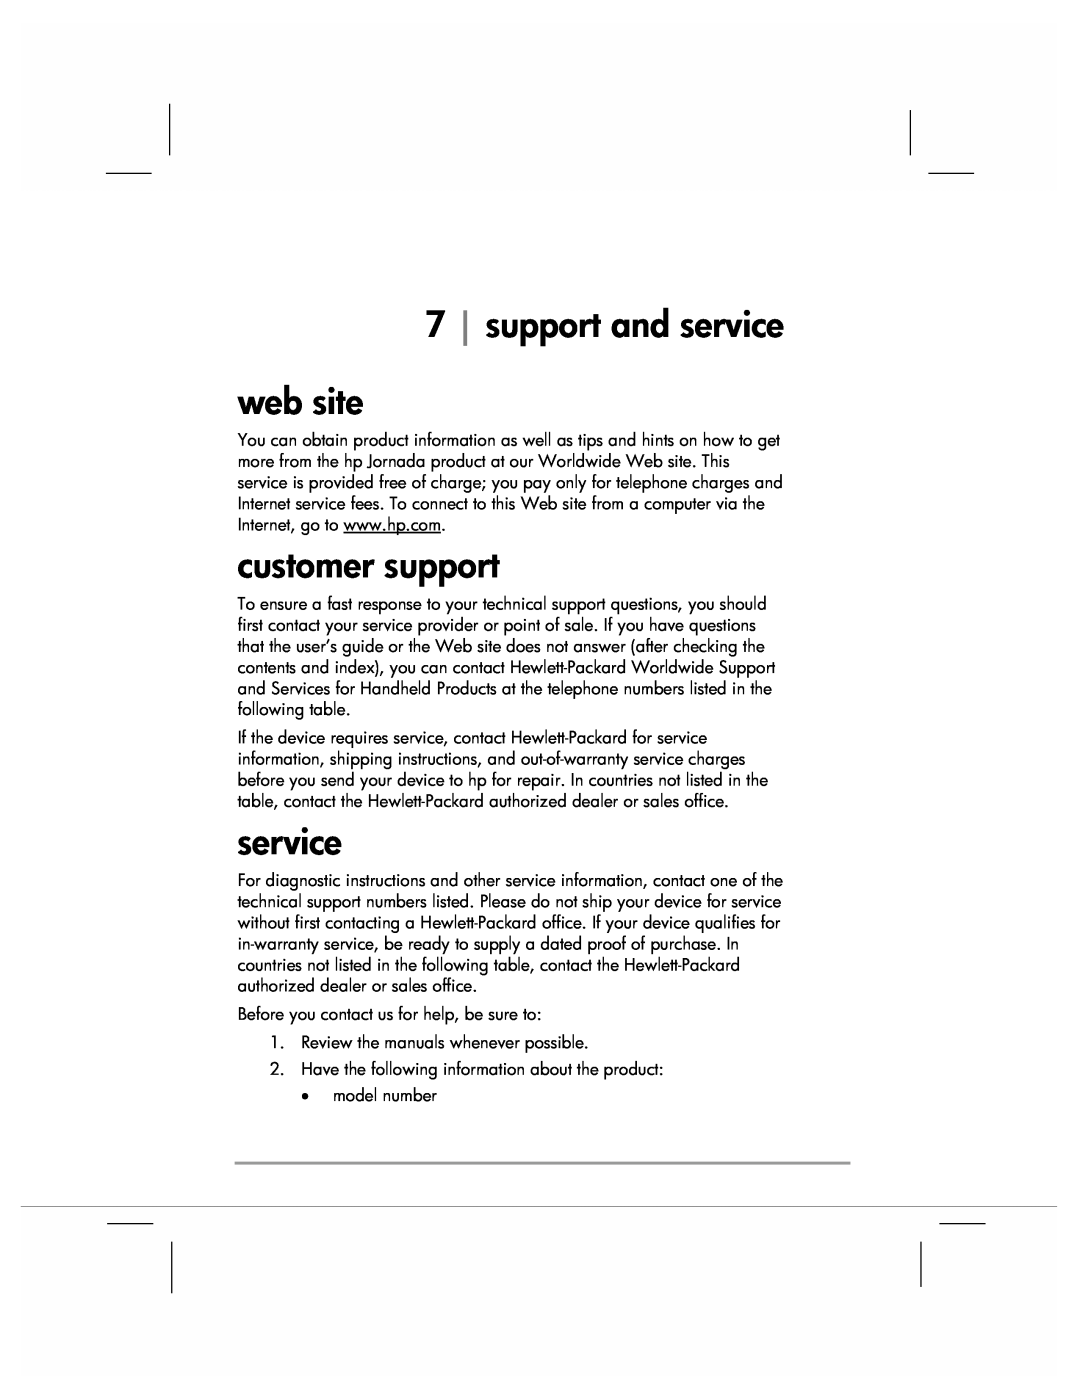 HP 920 manual support and service web site, customer support 